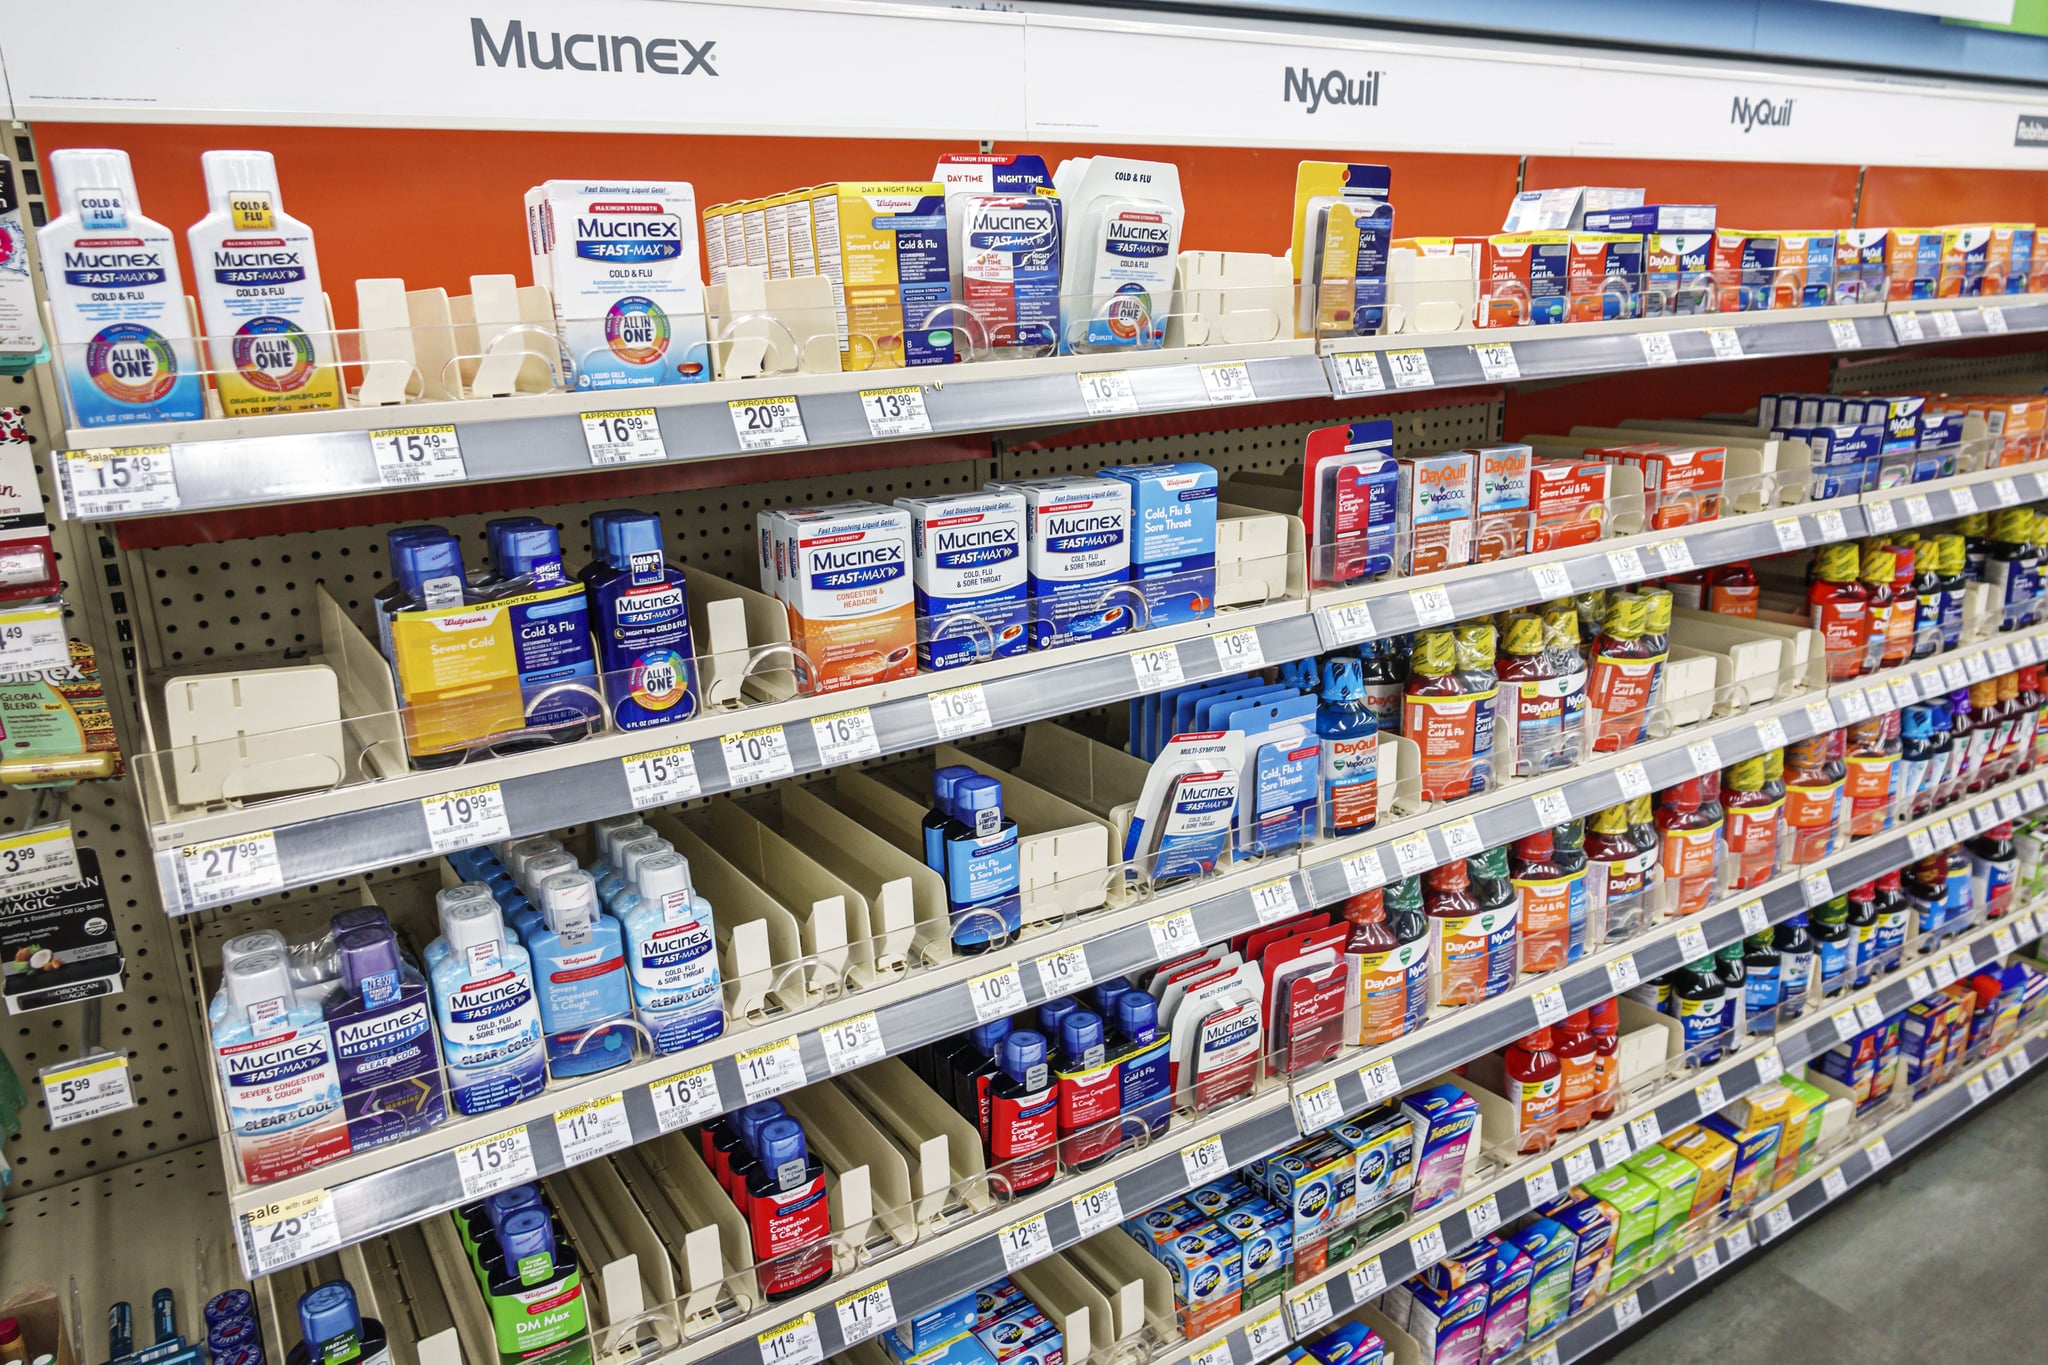 Walgreens pharmacy, Over the counter cough and flu medicine aisle. (Photo by: Jeffrey Greenberg/Education Images/Universal Images Group via Getty Images)